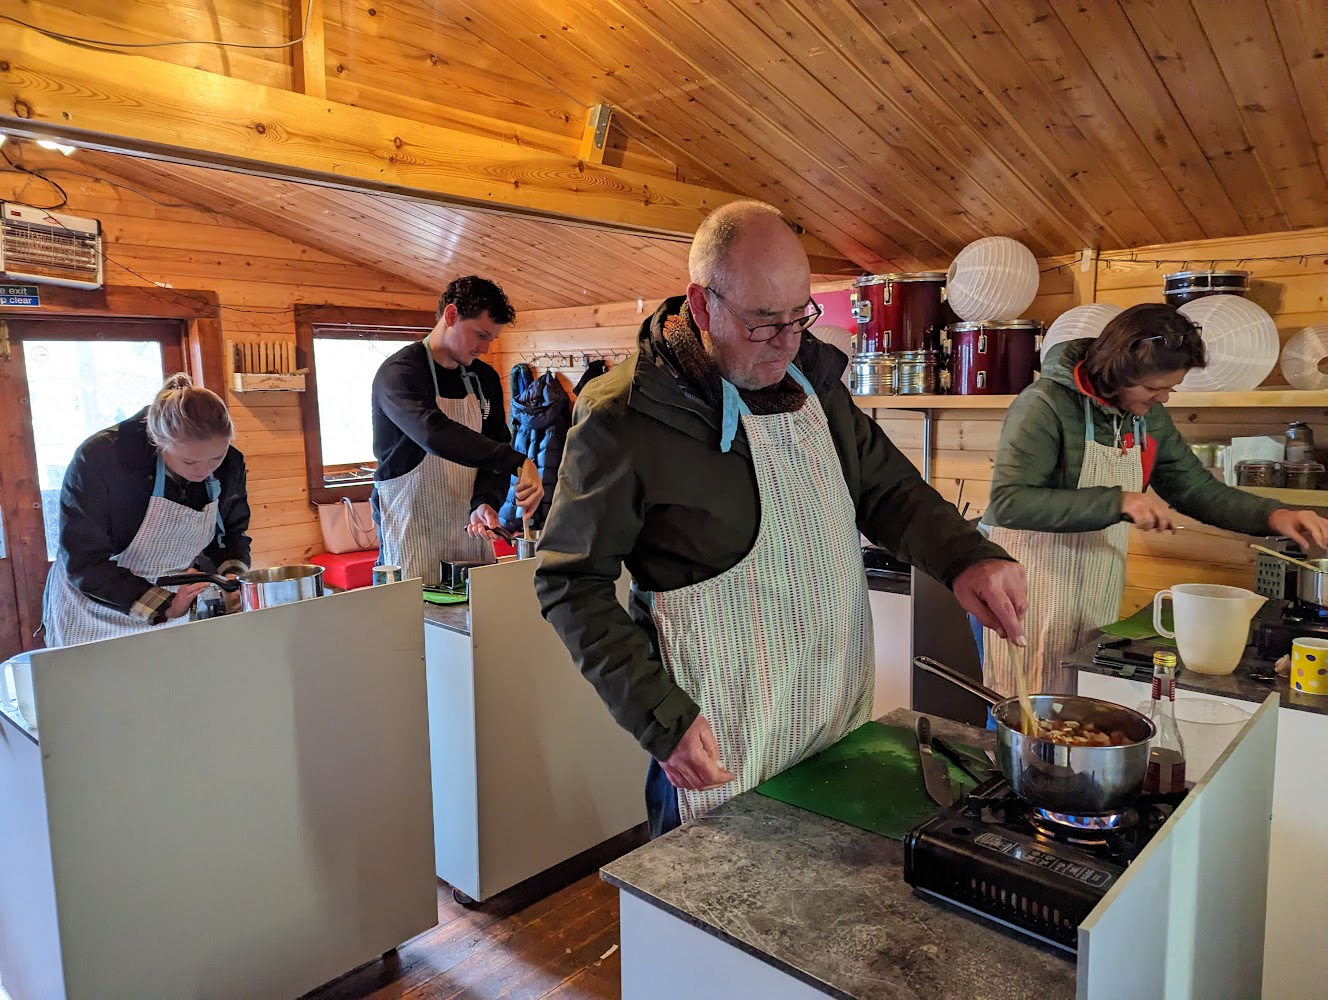 Picture of people at cooking stations in the log cabin making chilli sauces and jams.